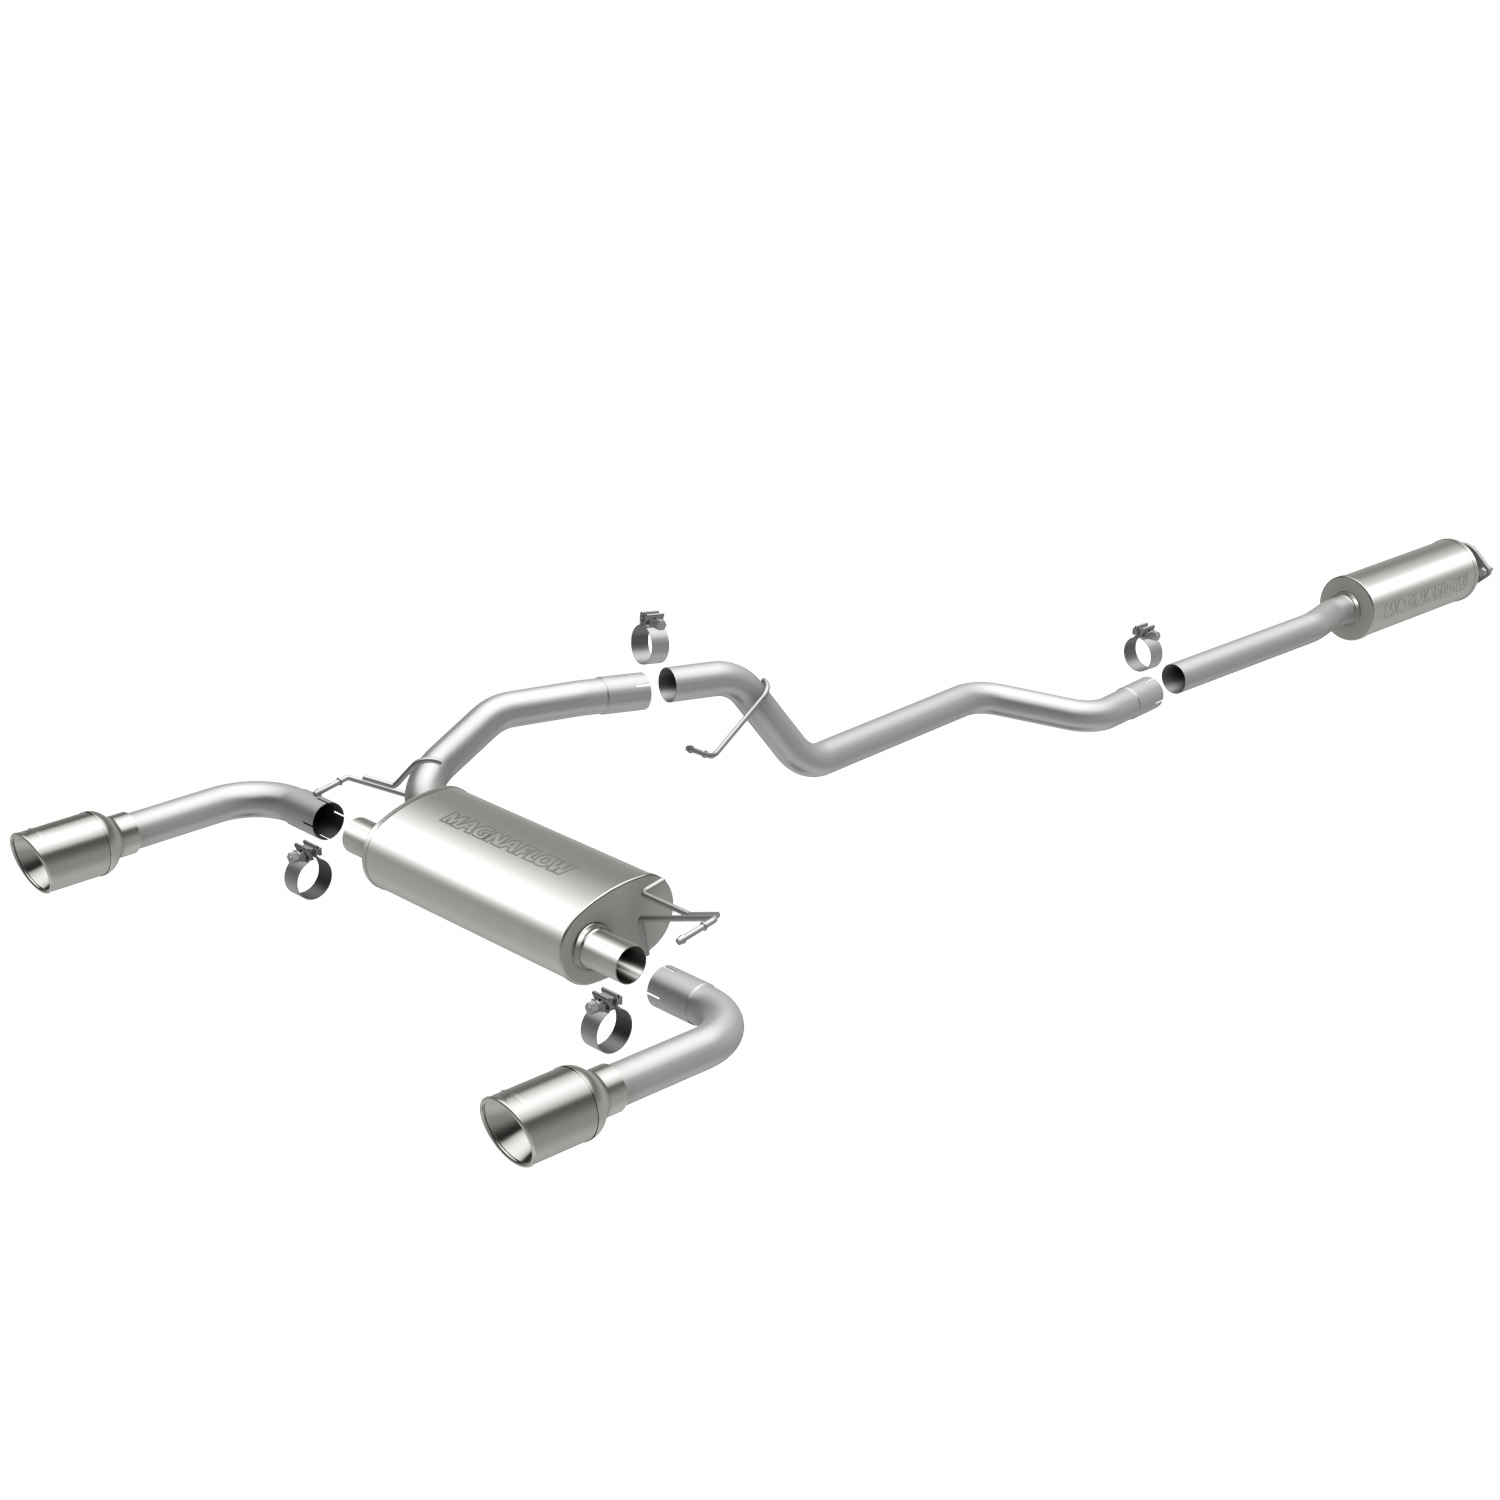 MF Series Cat-Back Exhaust System 2013-14 Ford Escape Turbo 1.6L L4